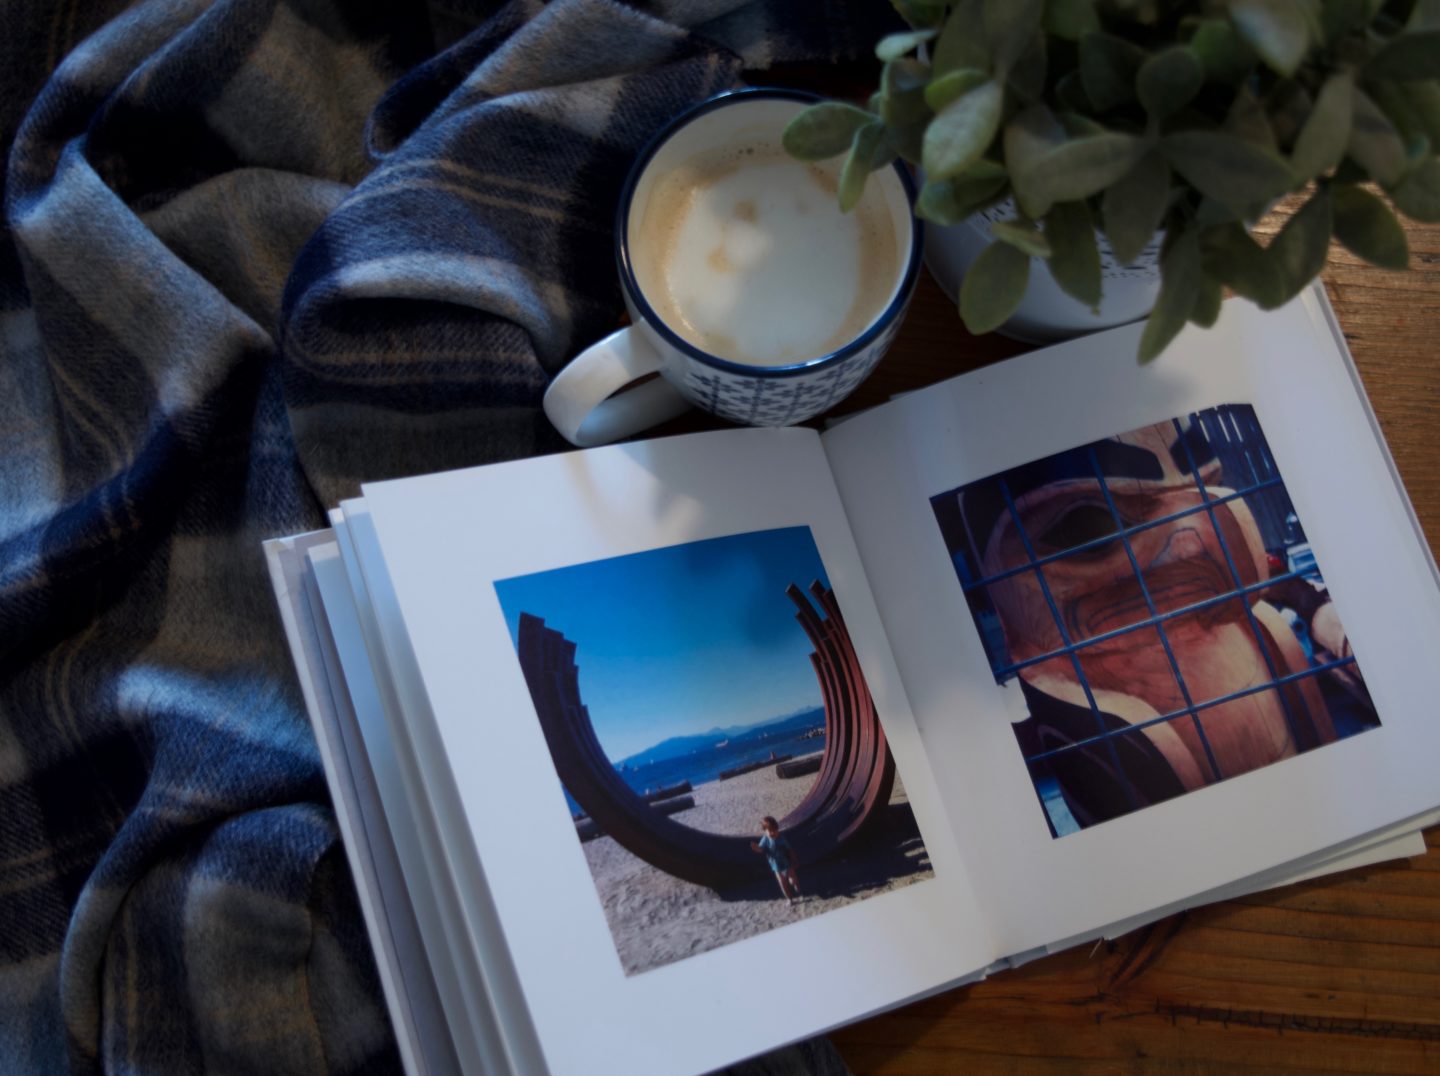 One of my many travel photo books... my son loves looking at them. And yes, that's my cozy Tartan Blanket Co. scarf there too